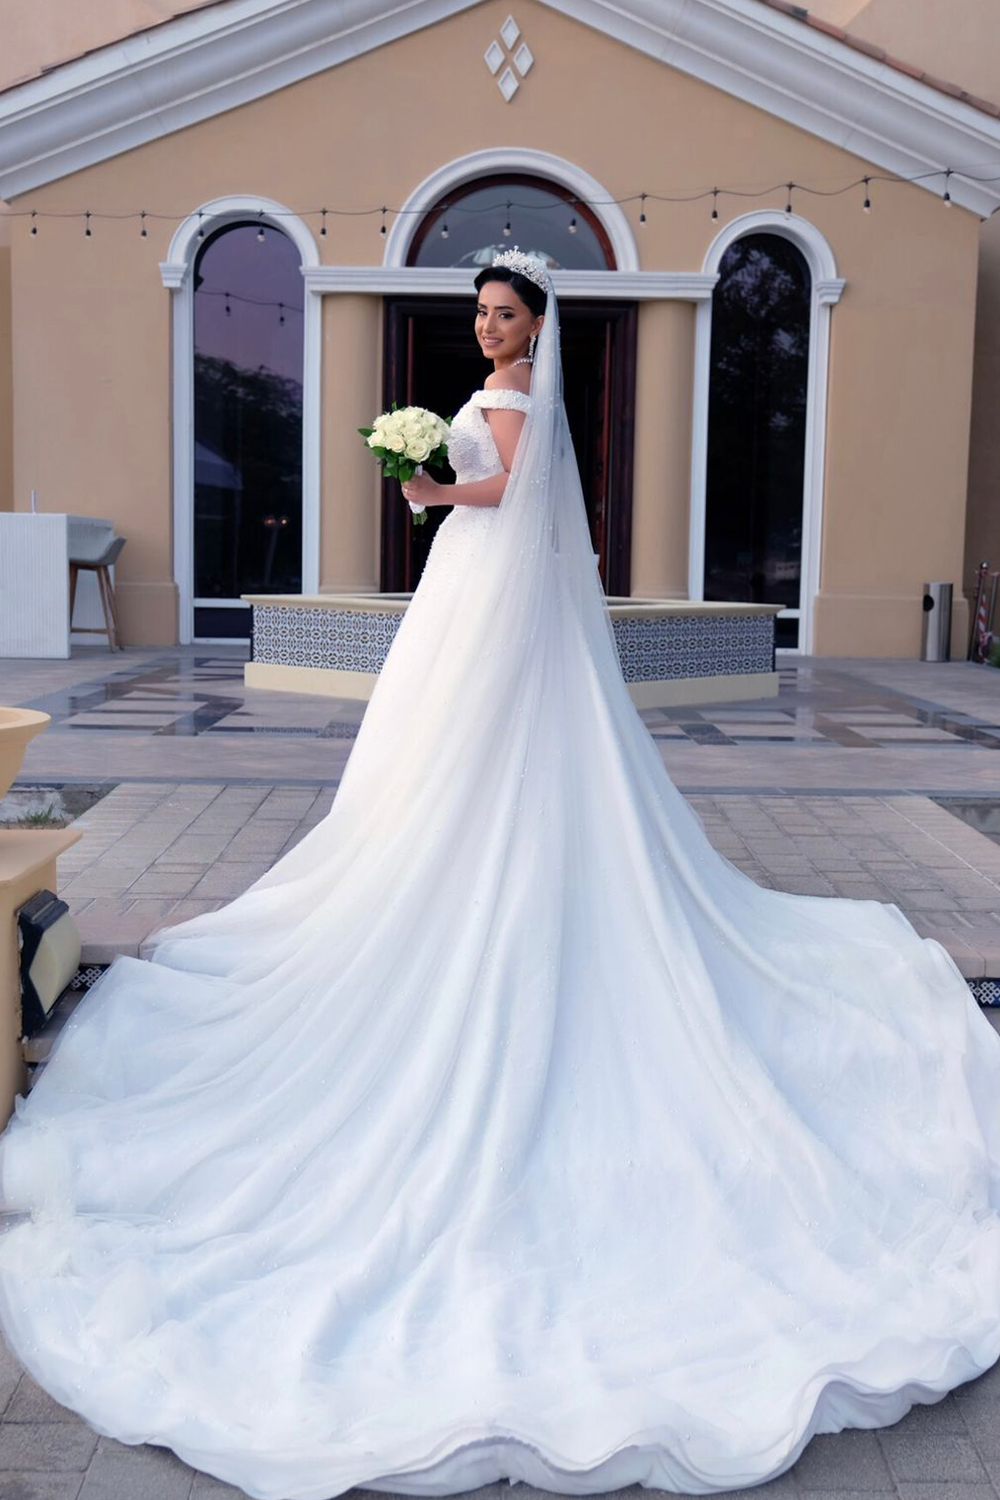 Timeless wedding gown